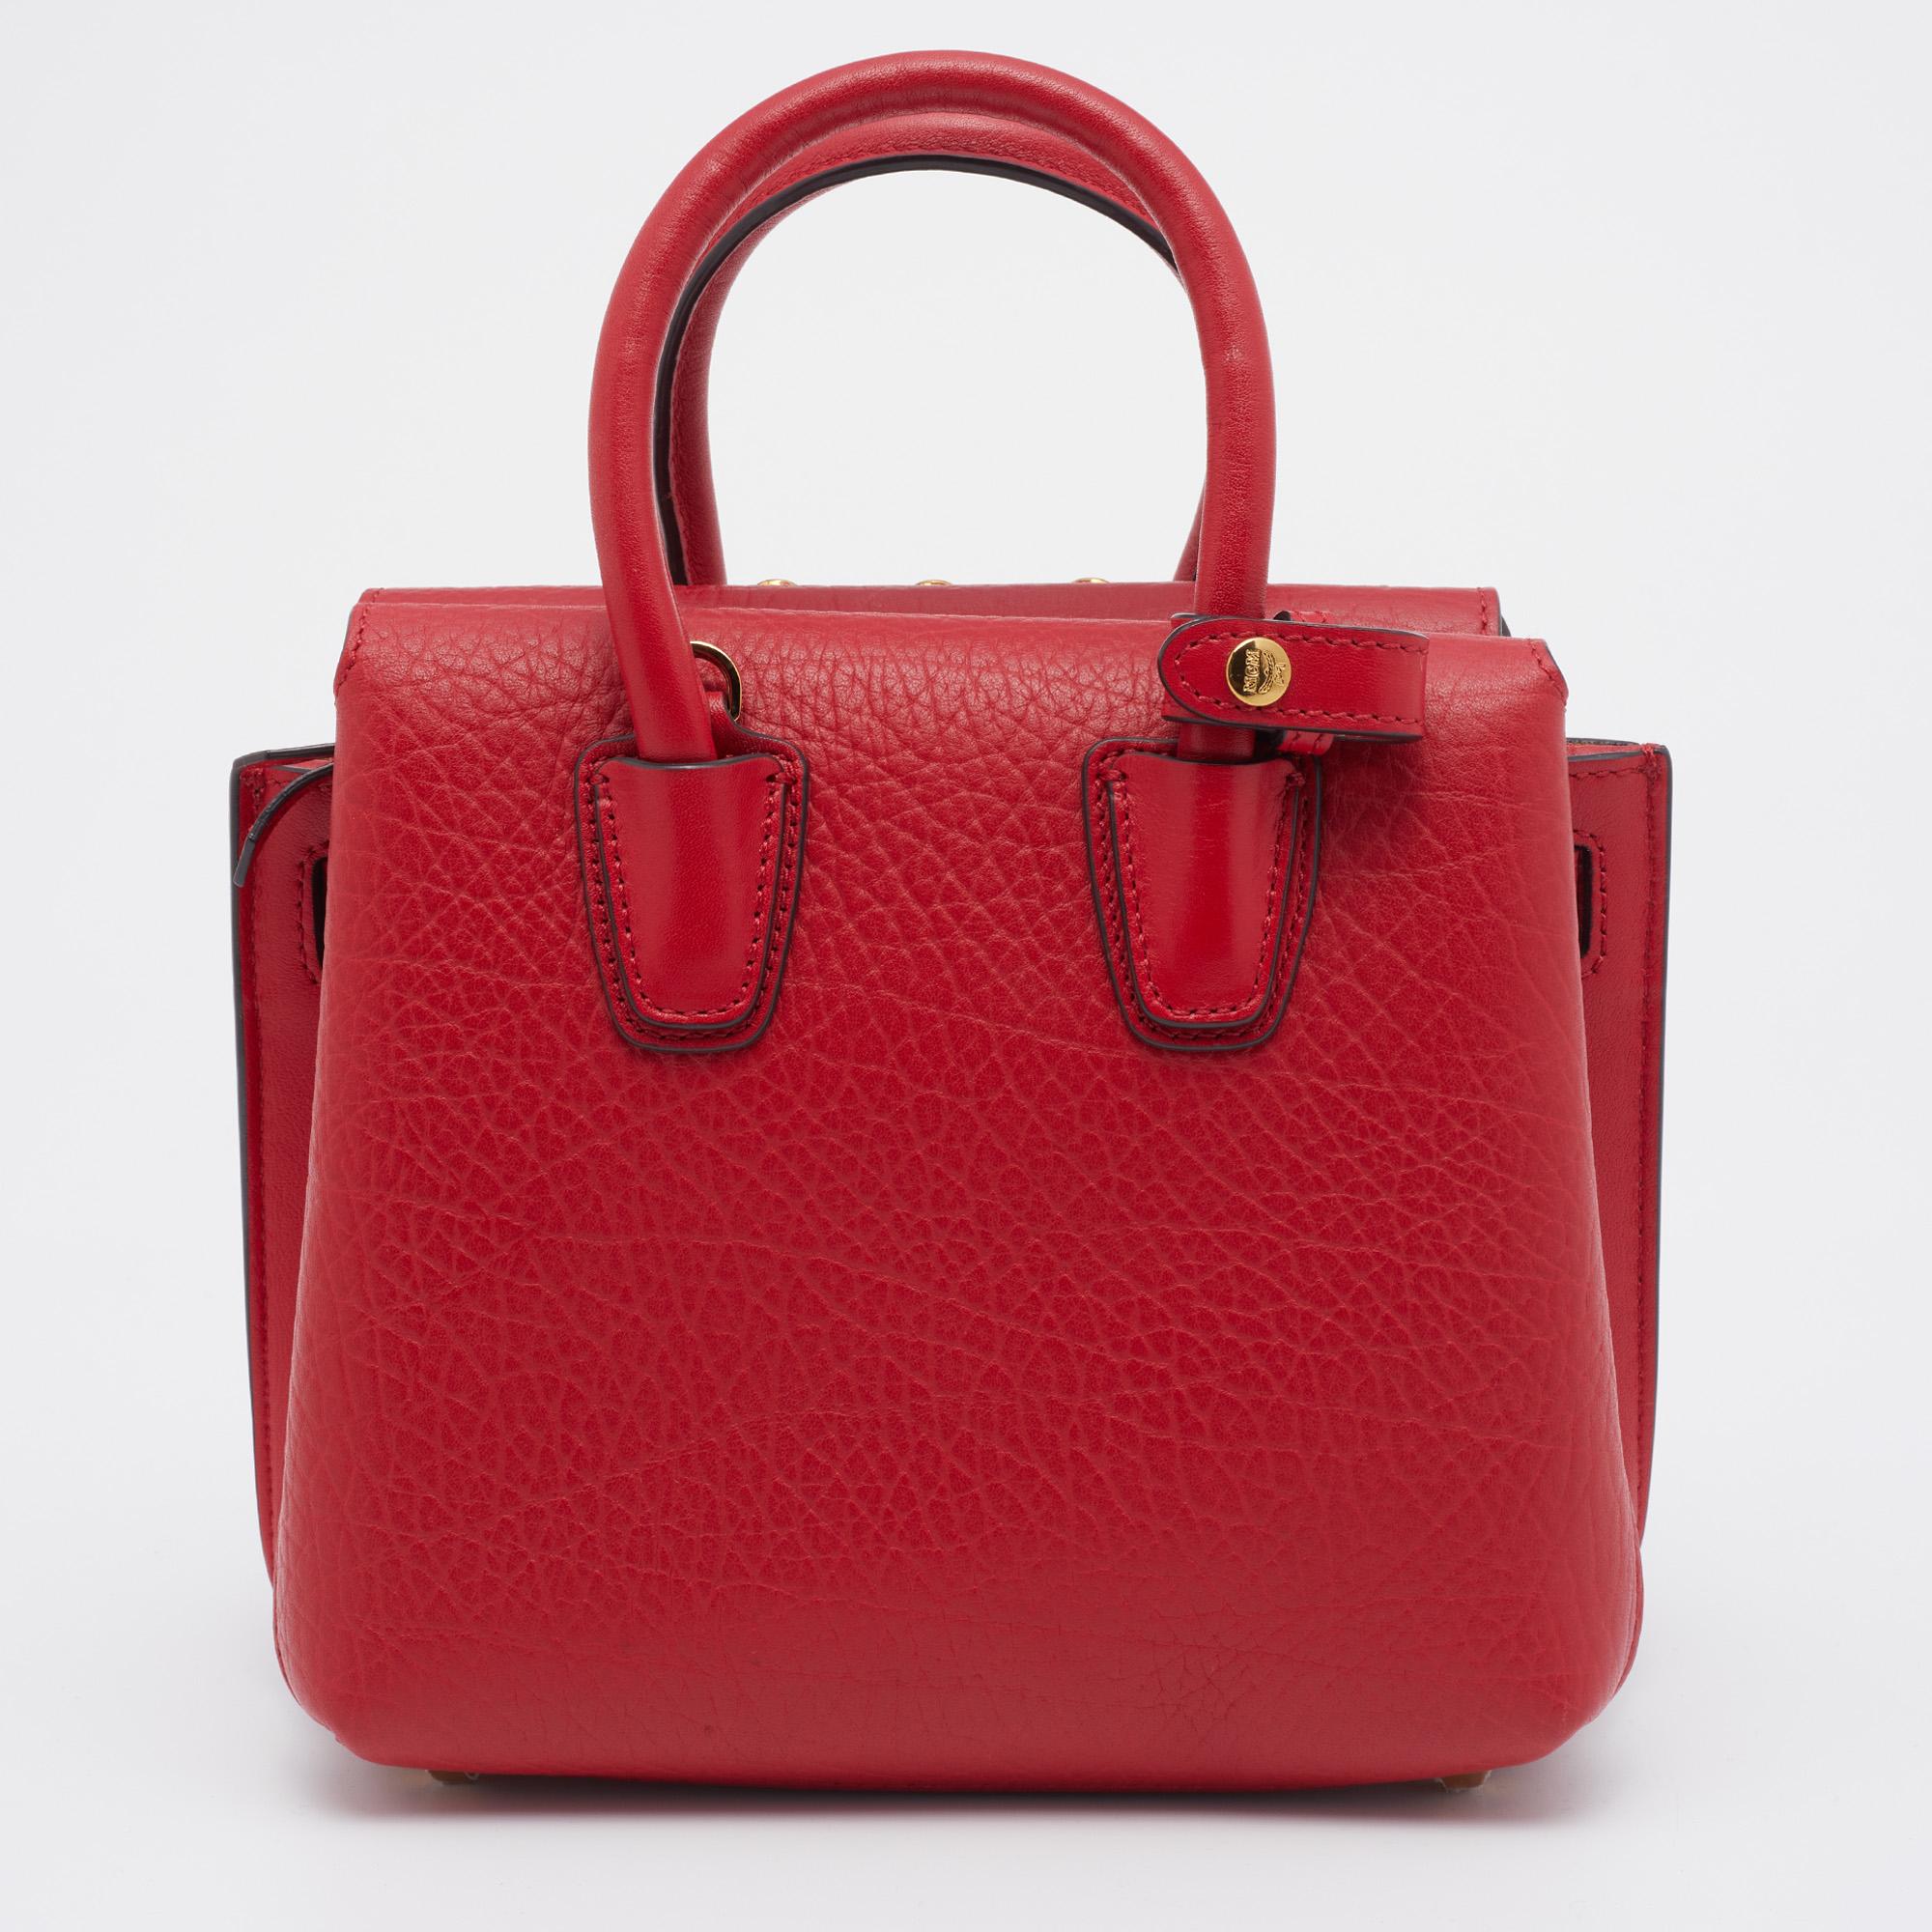 This gorgeous Milla satchel comes from the House of MCM. It is crafted from red leather on the exterior, which flaunts crystal embellishments on the front. It features two handles, gold-toned hardware, and a suede-lined interior. This stunning MCM